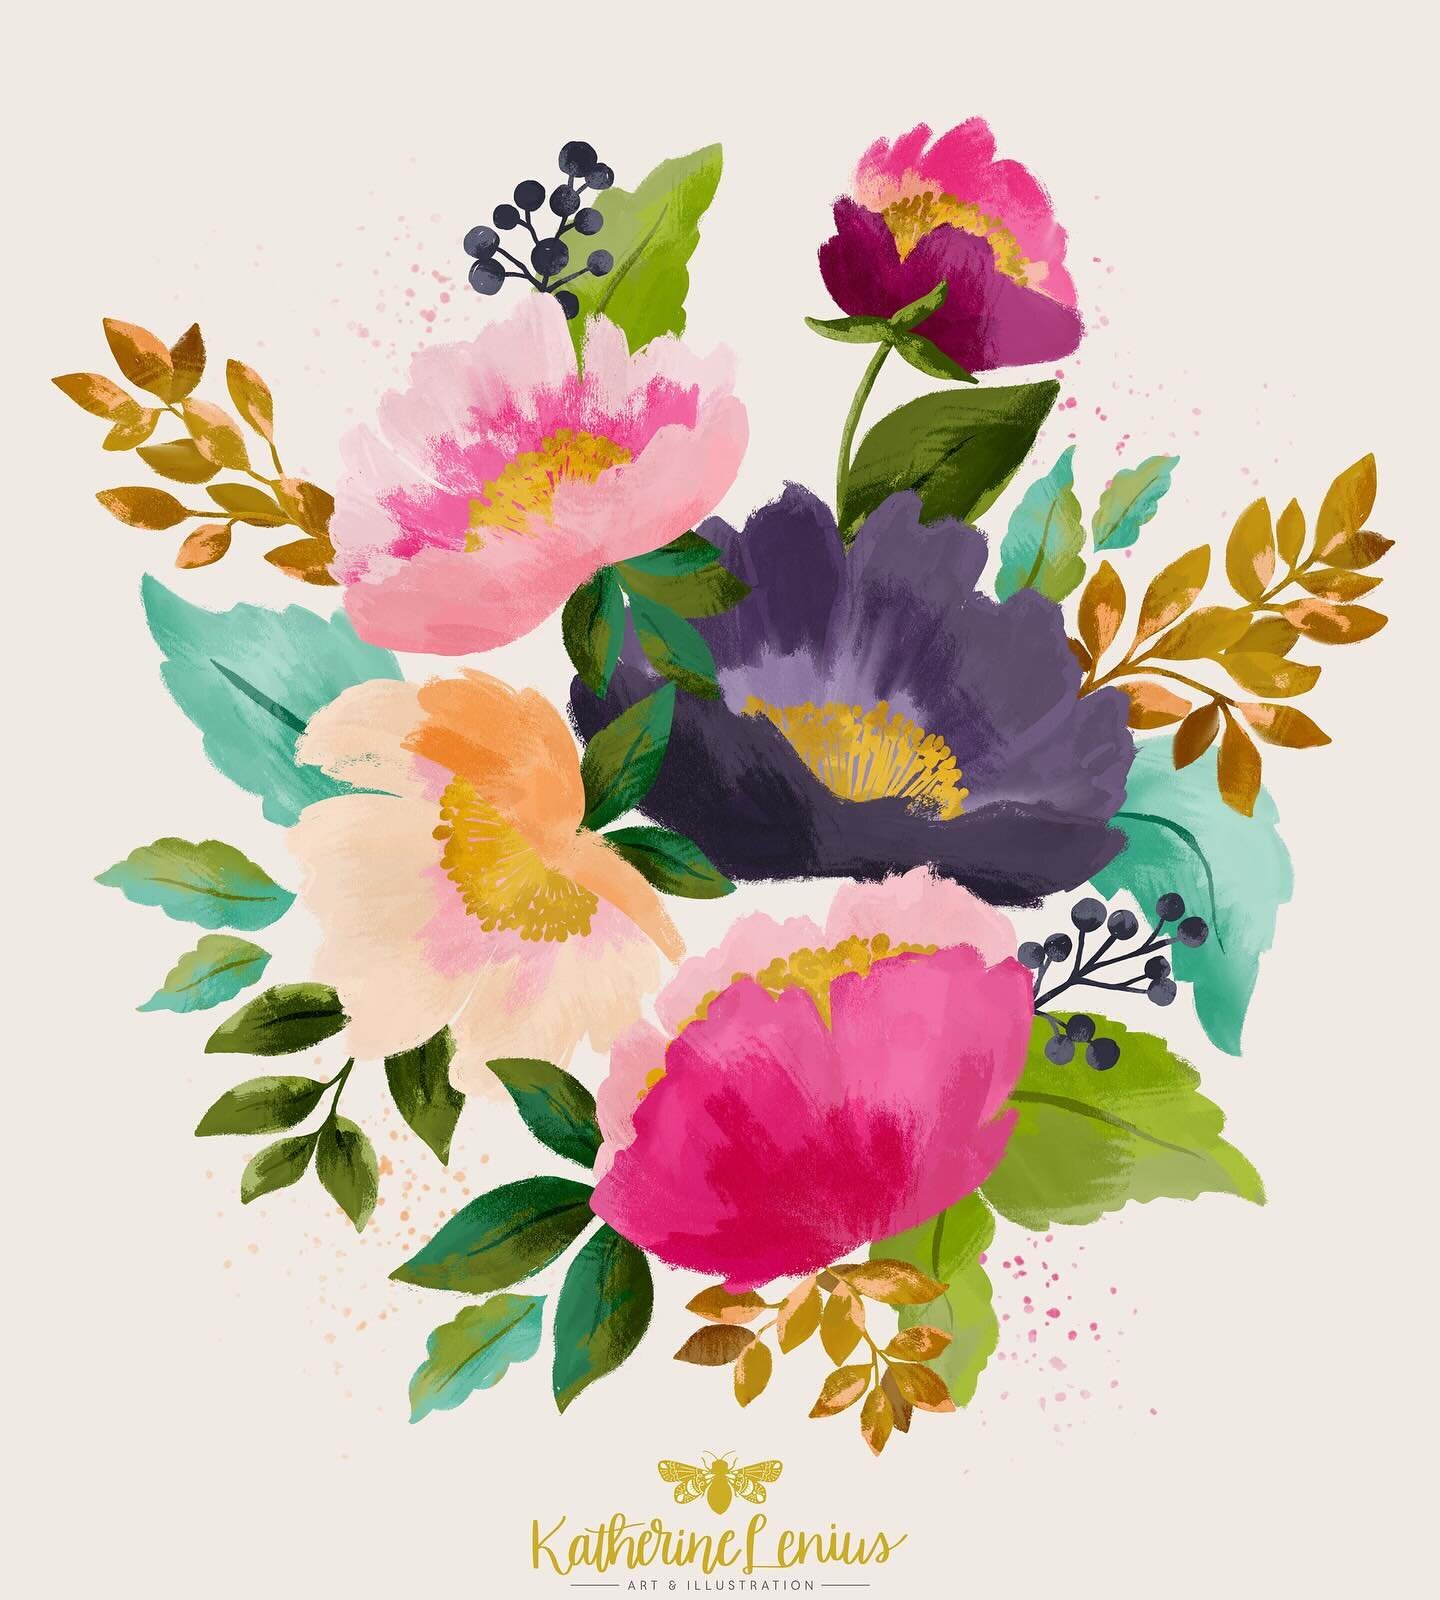 Experimenting with loose and messy digital painting. Not sure yet if I like it, but it&rsquo;s a low stakes way to try out different styles. Loving the bright colors though. 

#floralpainting #floralillustration #surfacedesign #artlicensing #floralar